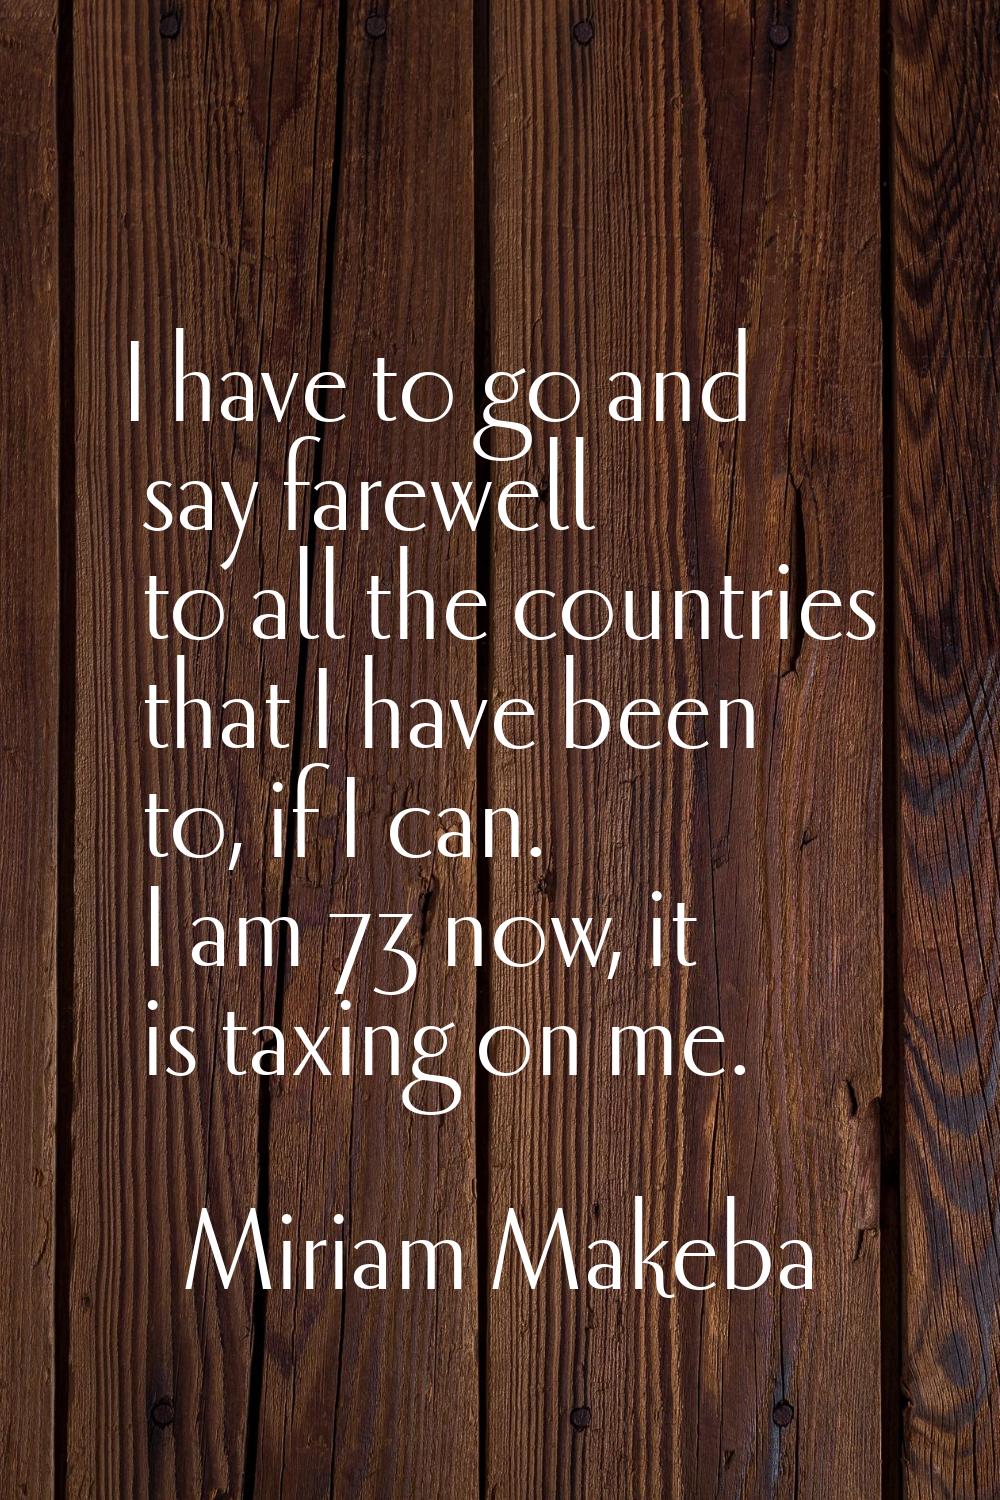 I have to go and say farewell to all the countries that I have been to, if I can. I am 73 now, it i